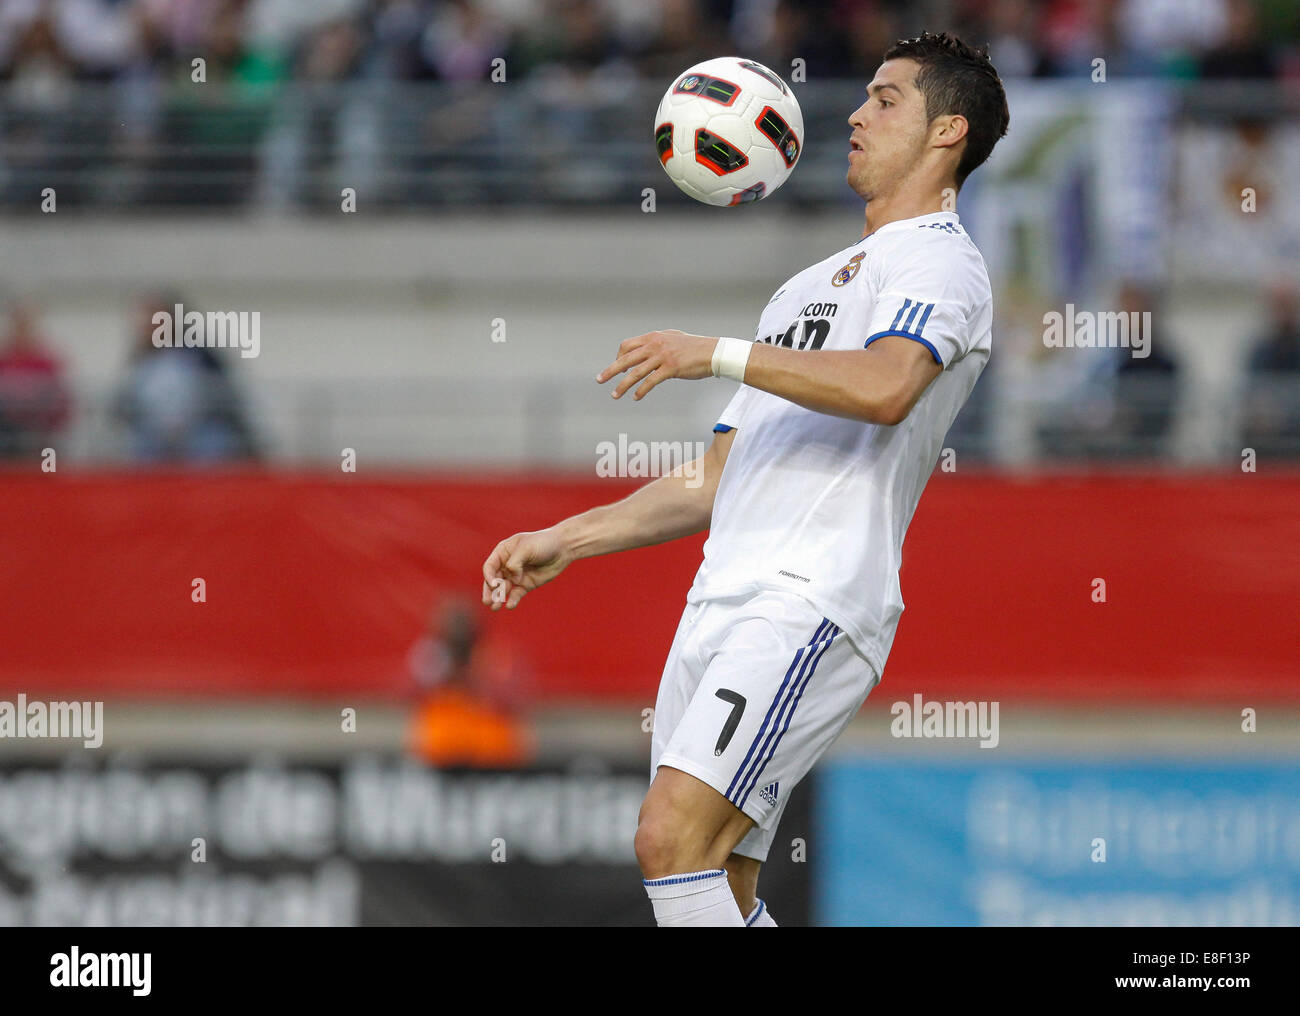 CRISTIANO RONALDO, REAL MADRID, football, DVD Banque D'Images